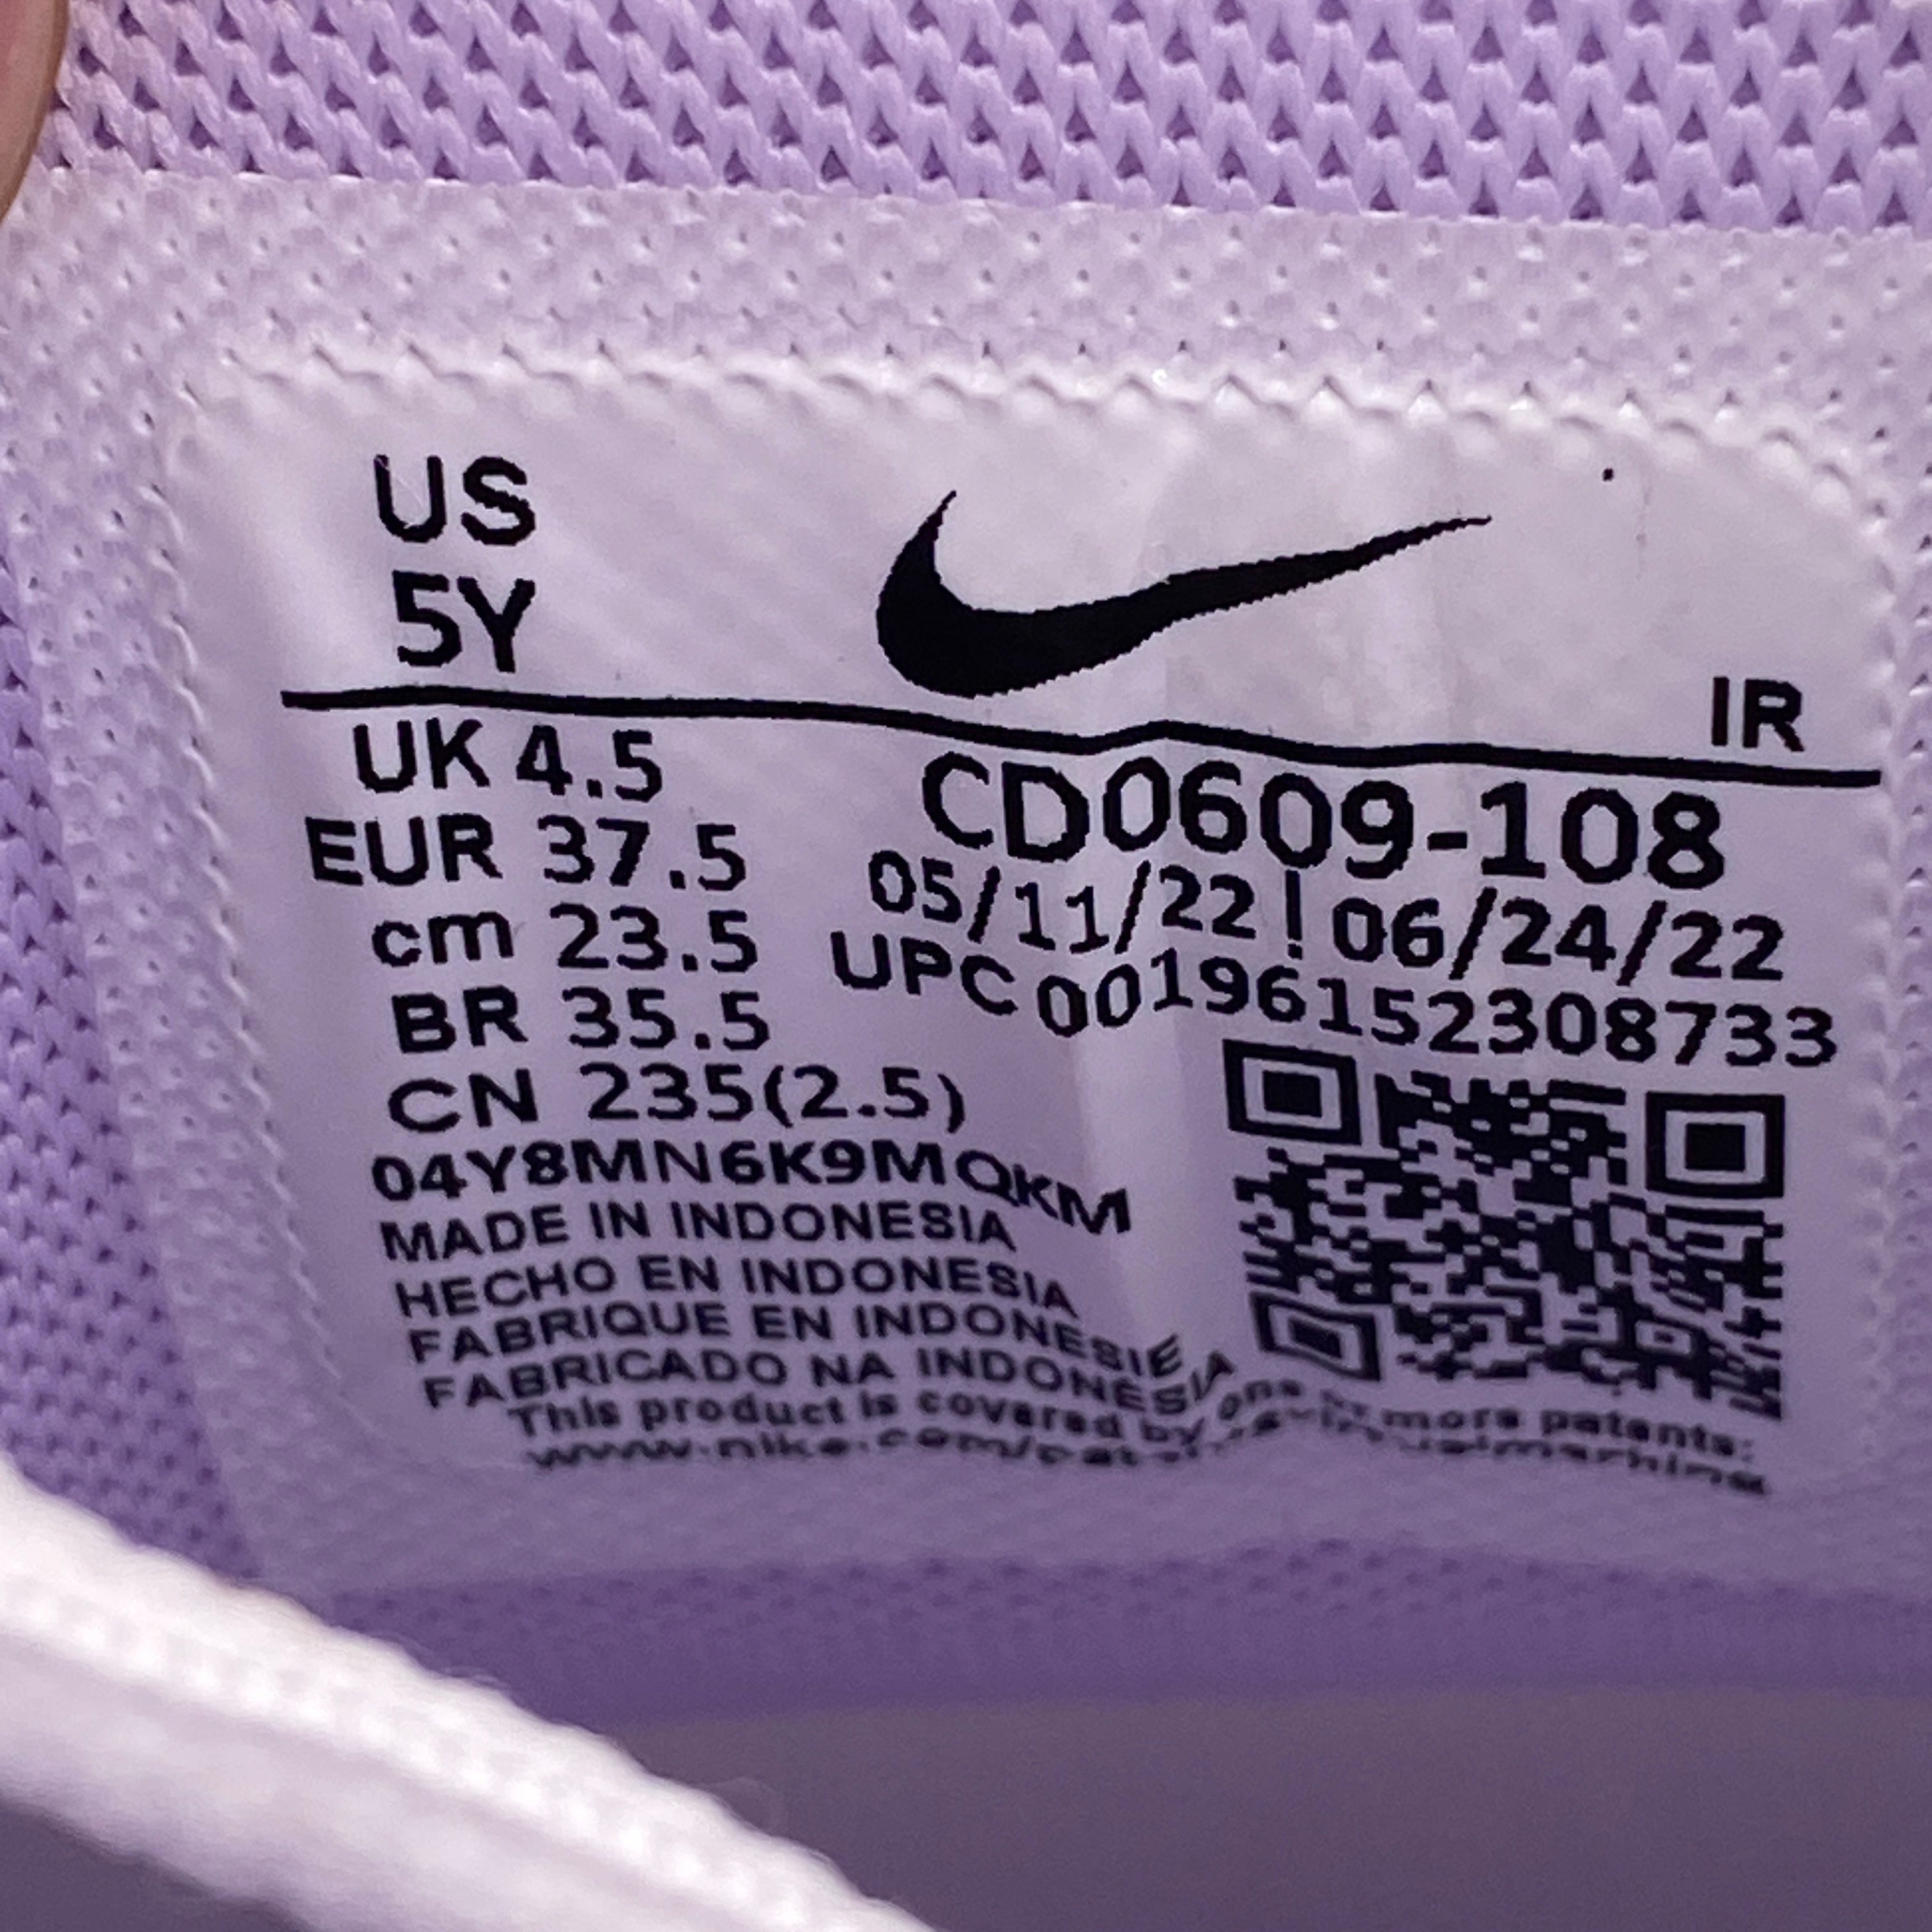 Nike Air Max Plus (GS) "Pure Platinum Violet Frost" 2022 New Size 5Y